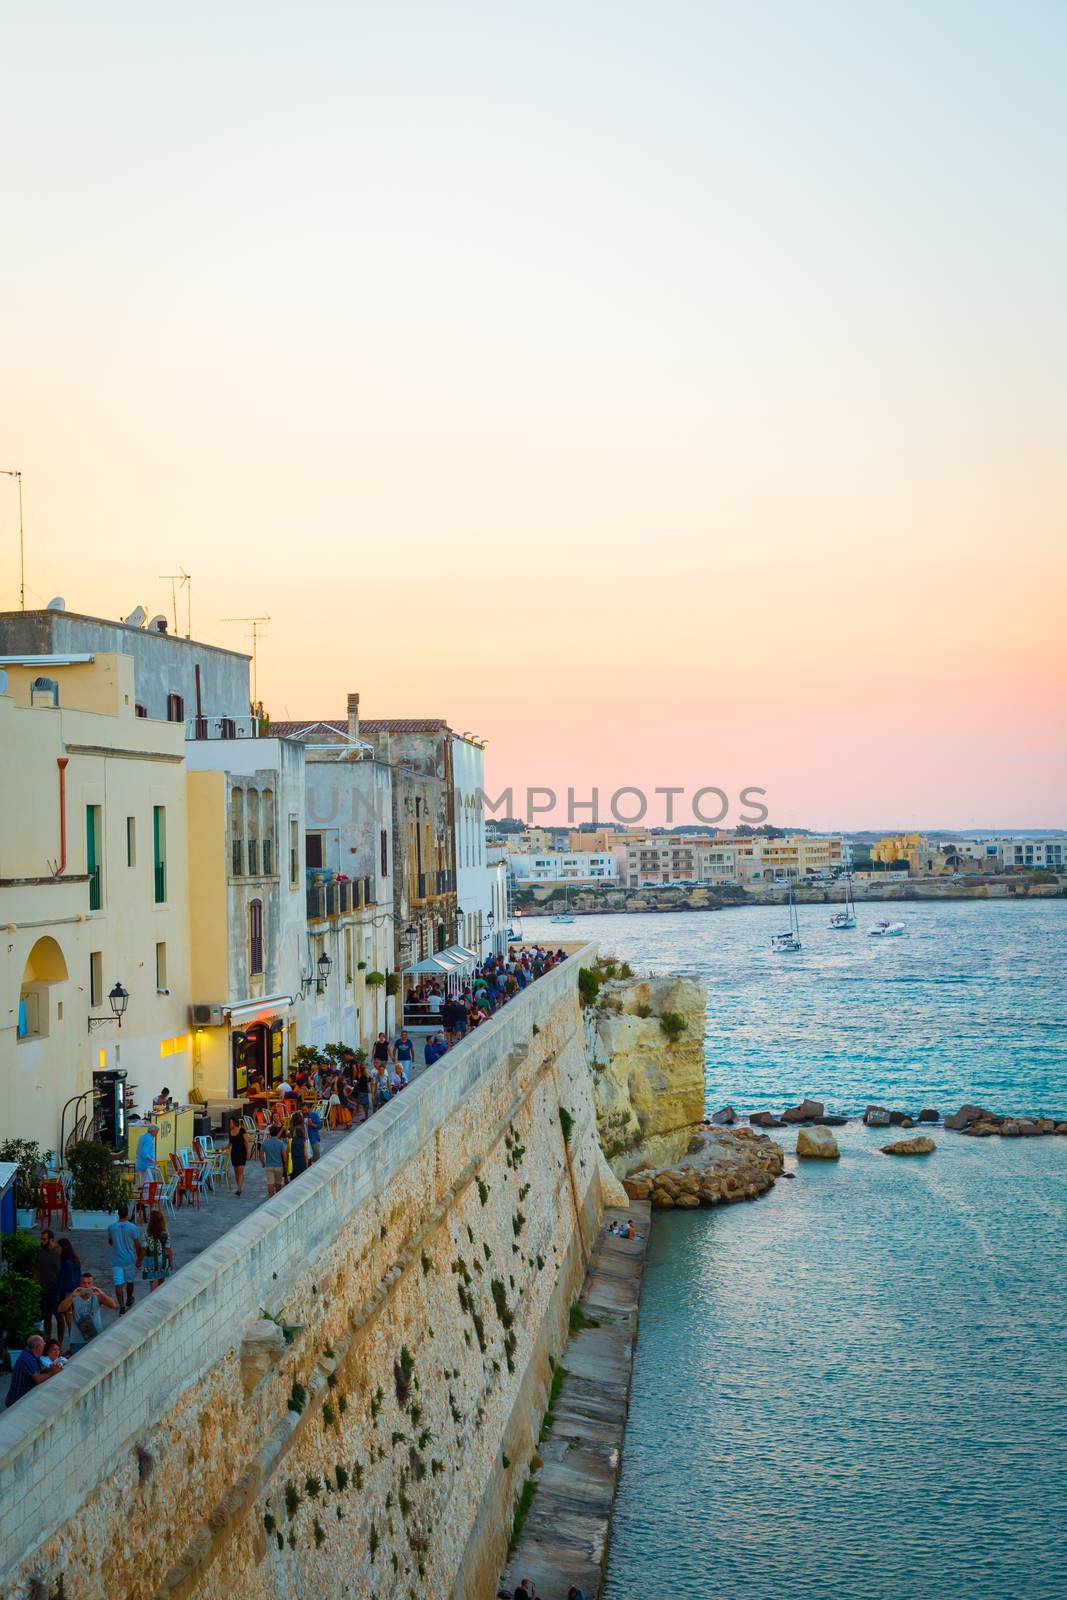 At peak of turistic season, the turist crowd is walking at sunset on the road from the new to the old side of Otranto town